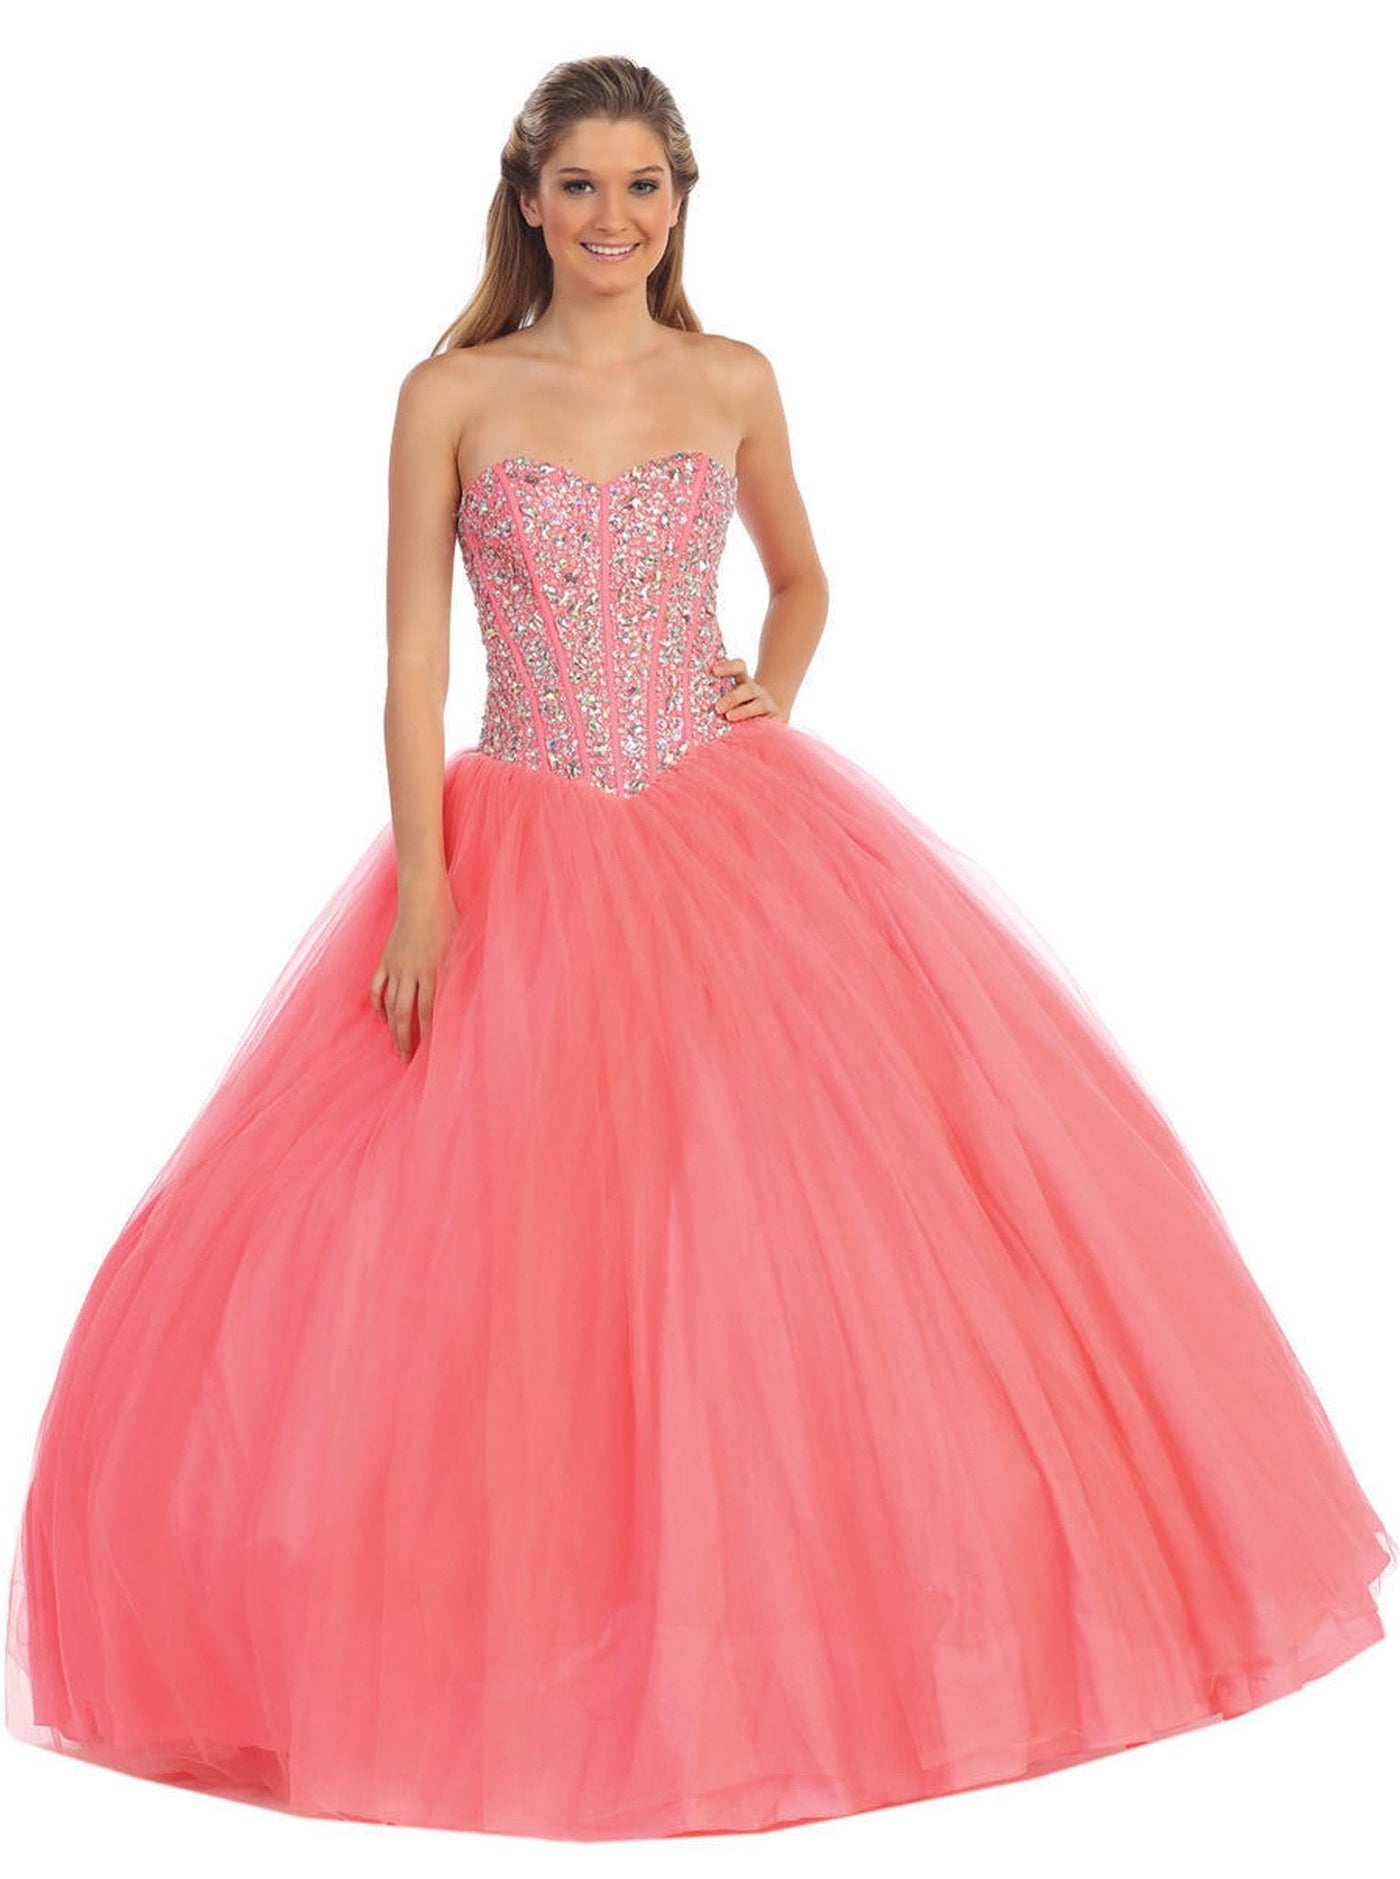 Dancing Queen - 9094 Embellished Sweetheart Evening Gown Special Occasion Dress XS / Coral